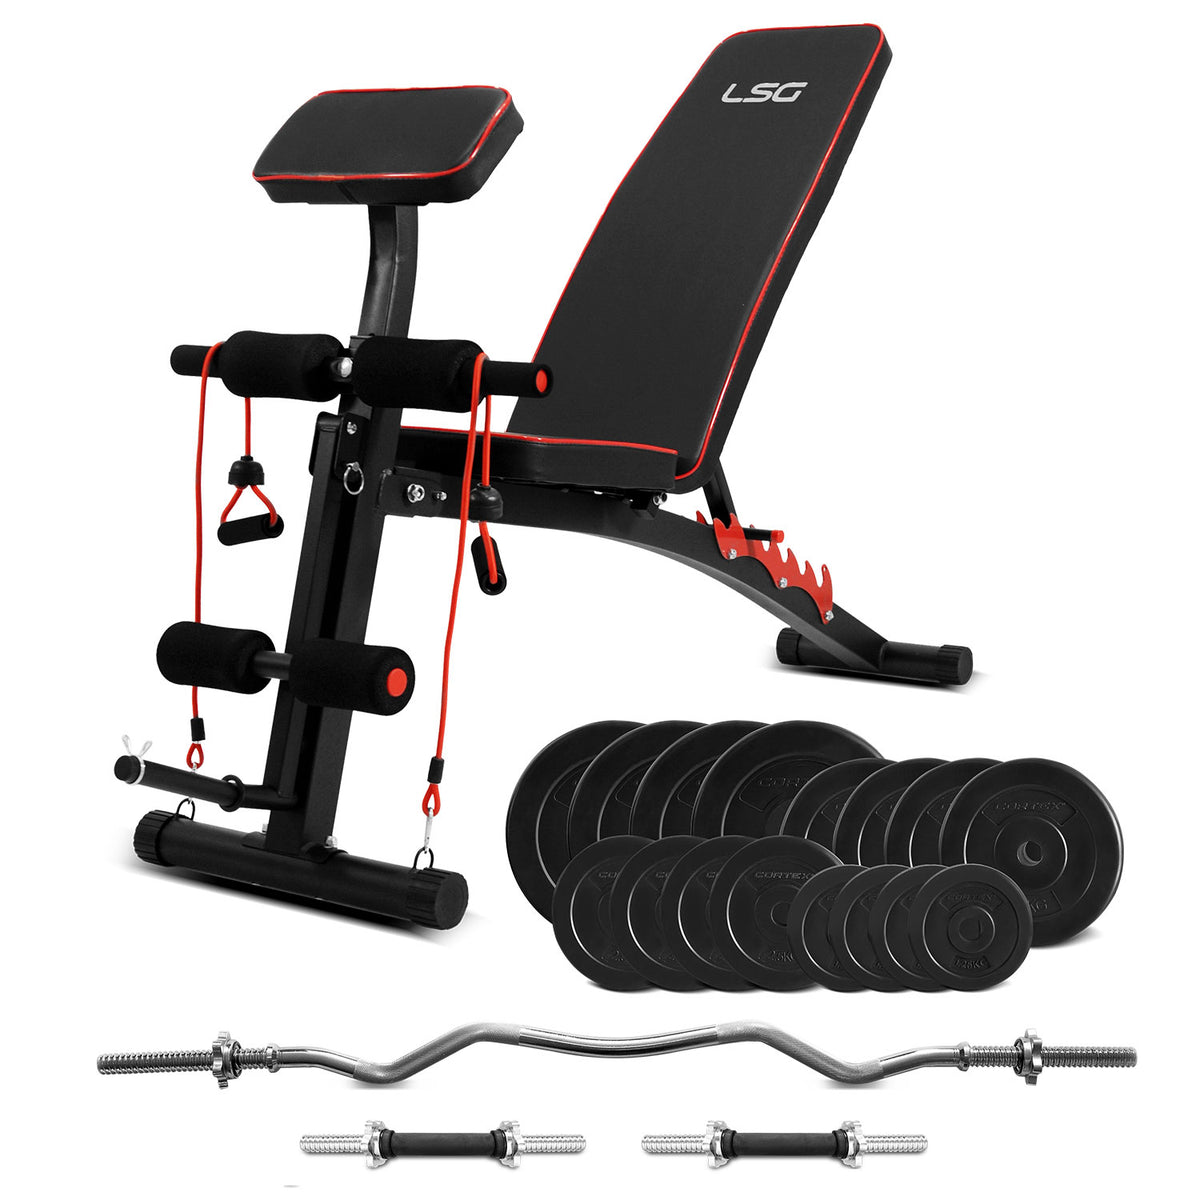 LSG GBN007 FID Bench with 84kg Weight and Bar set